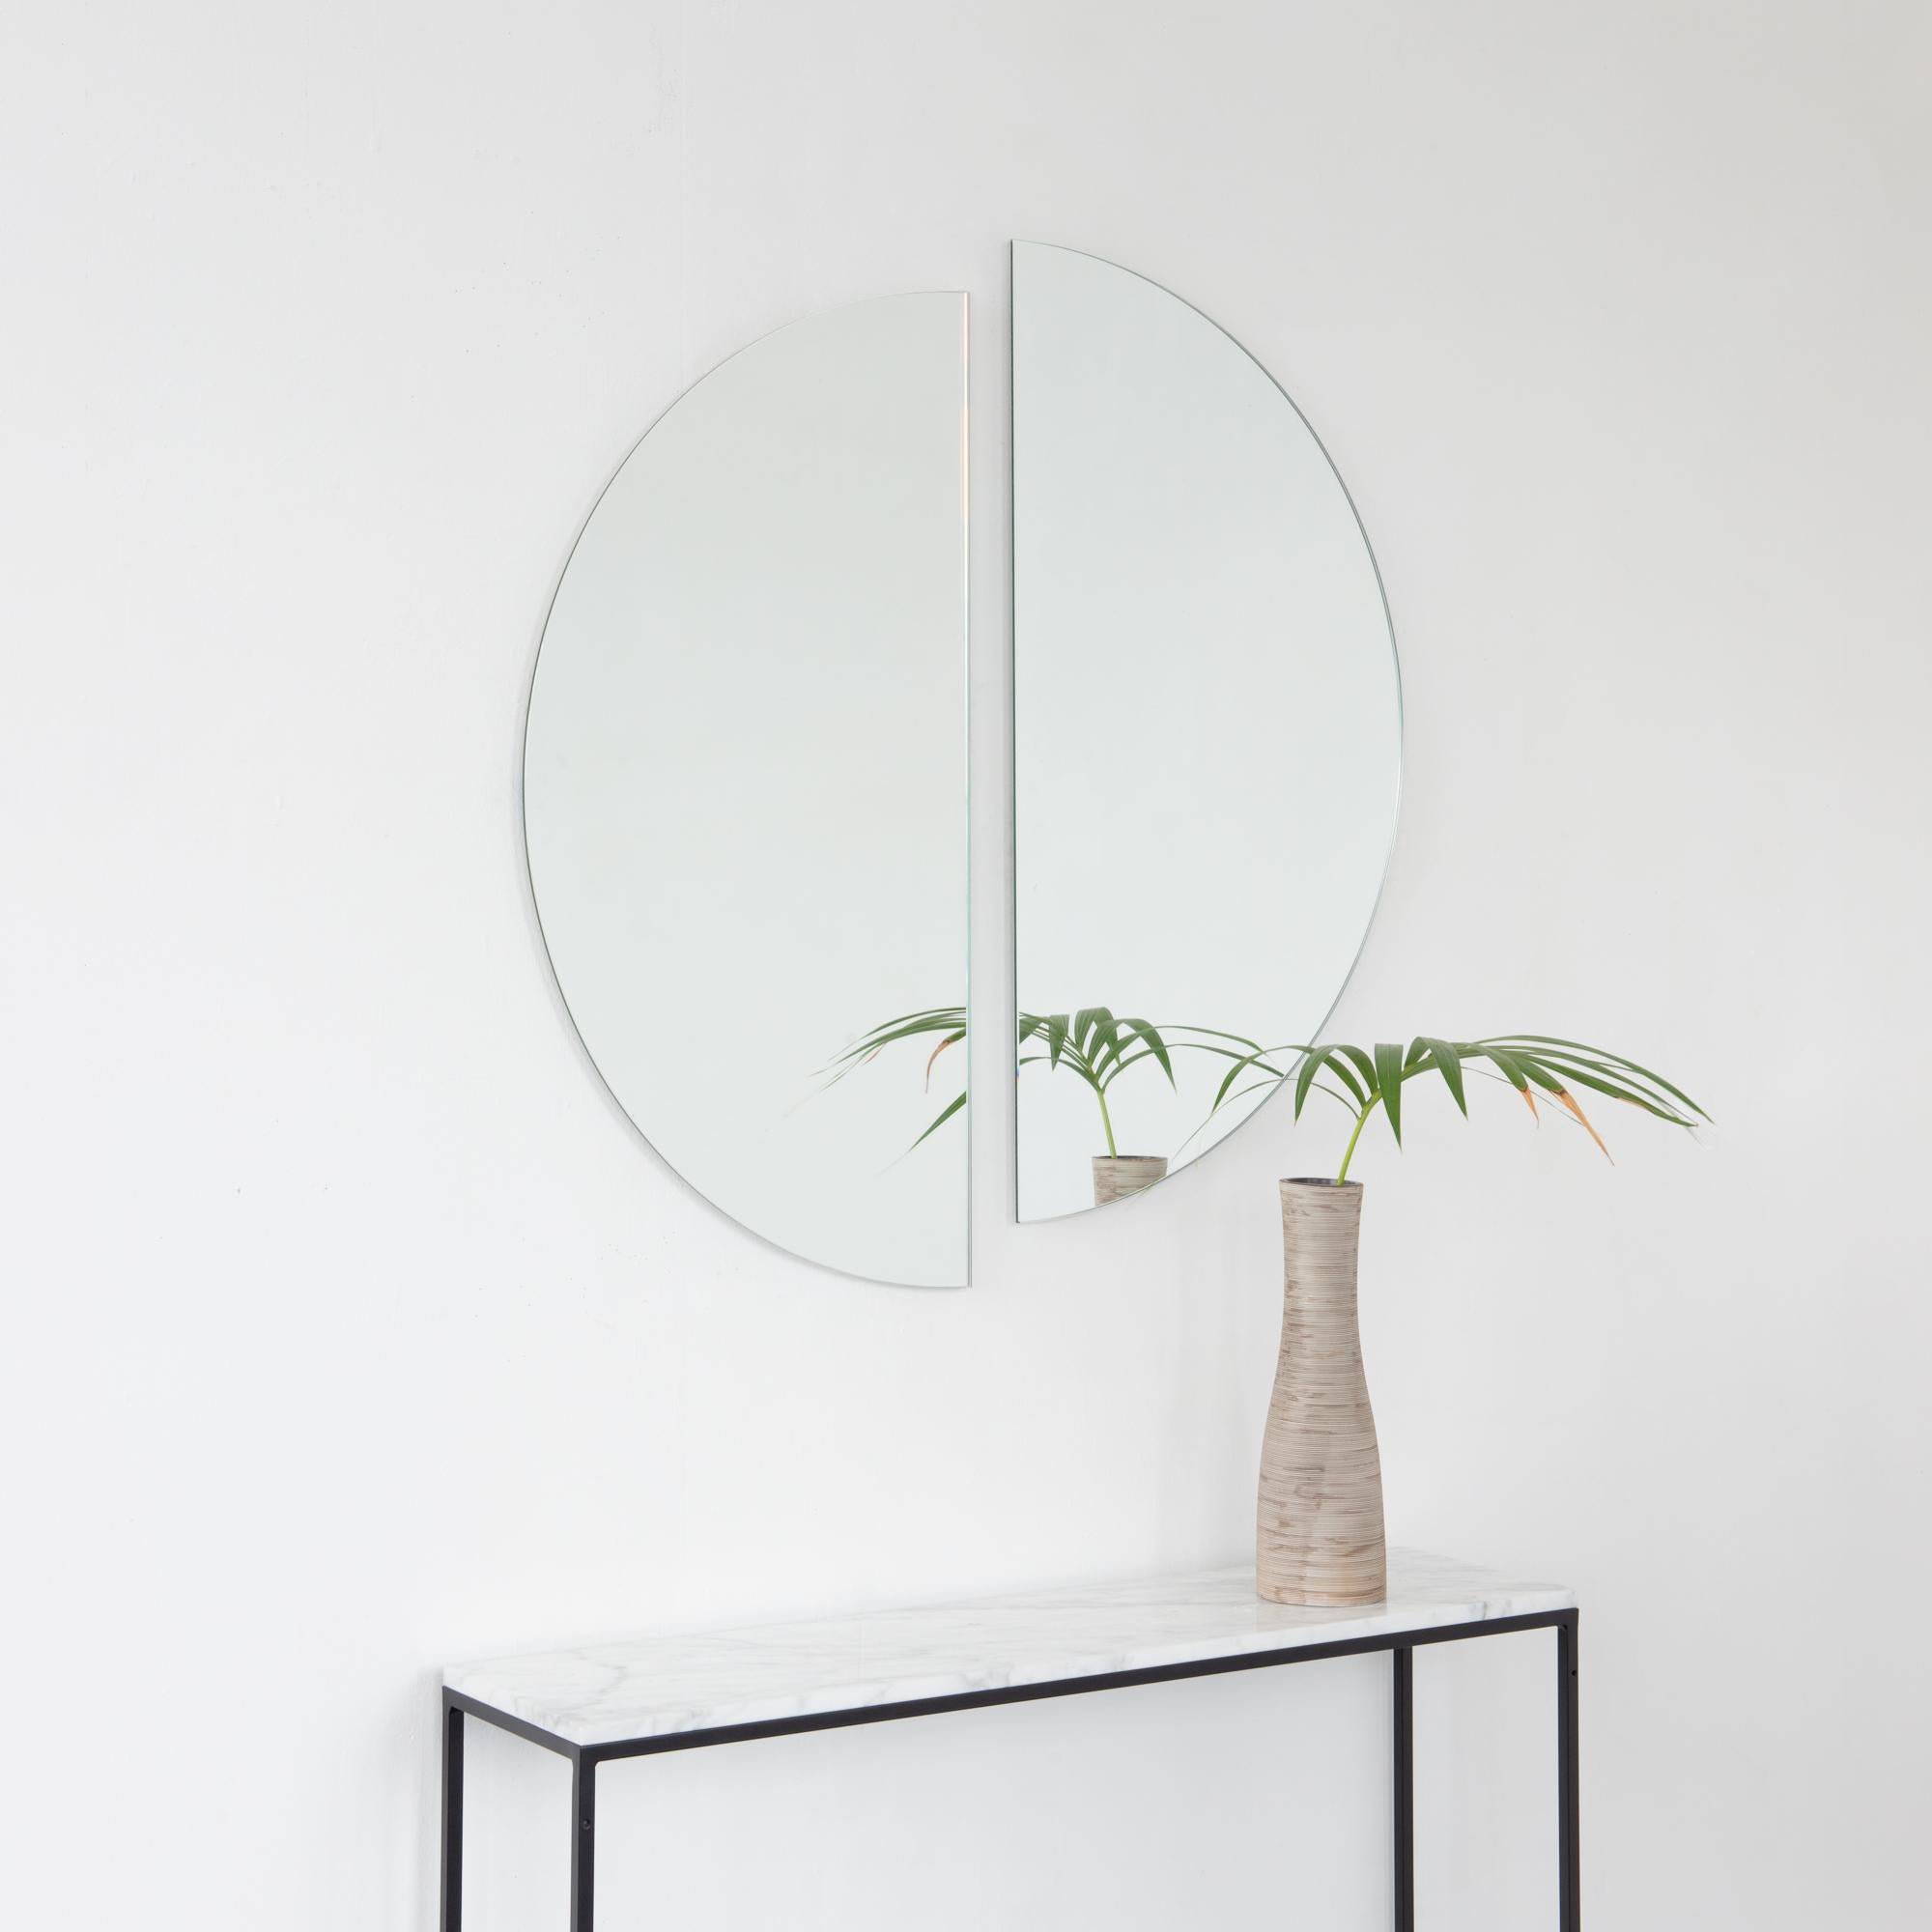 NEW DESIGN

Set of two charming and minimalist half-moon frameless mirrors with a floating effect. Fitted with a quality and ingenious hanging system for a flexible installation in 4 different directions. Designed and made in London, UK. 

The